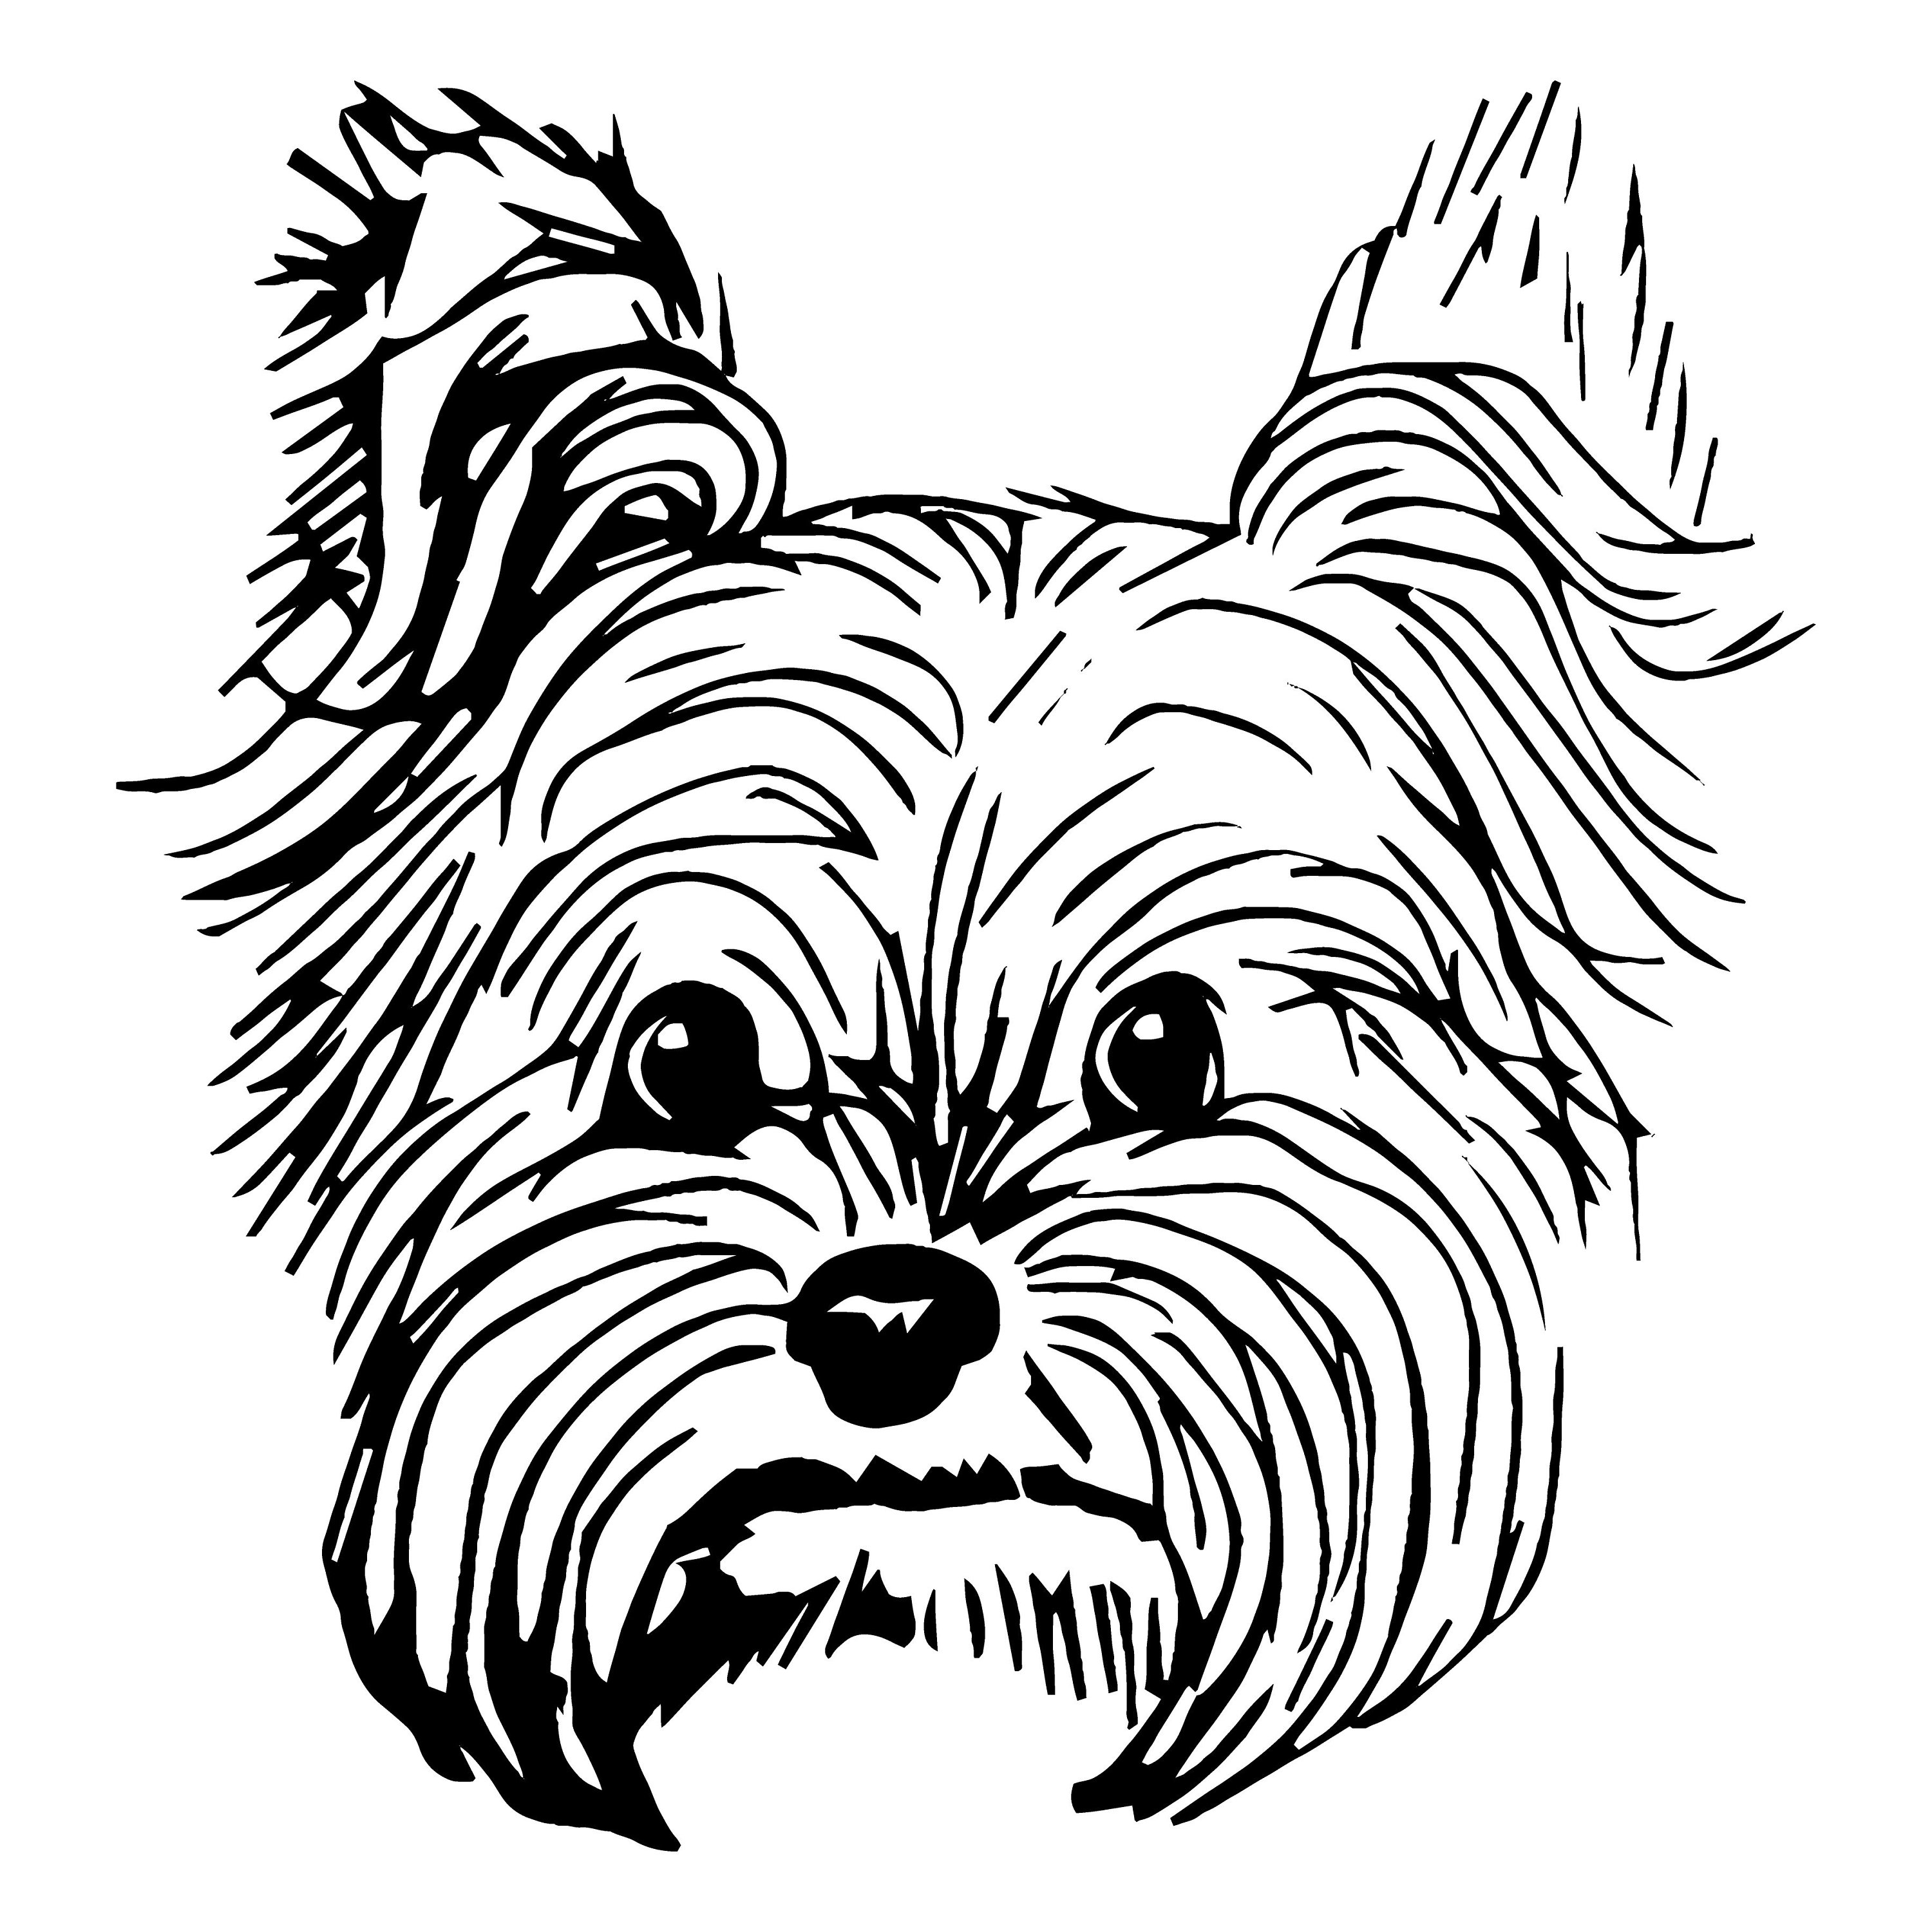 Yorkie Dog Drawing | Free download on ClipArtMag